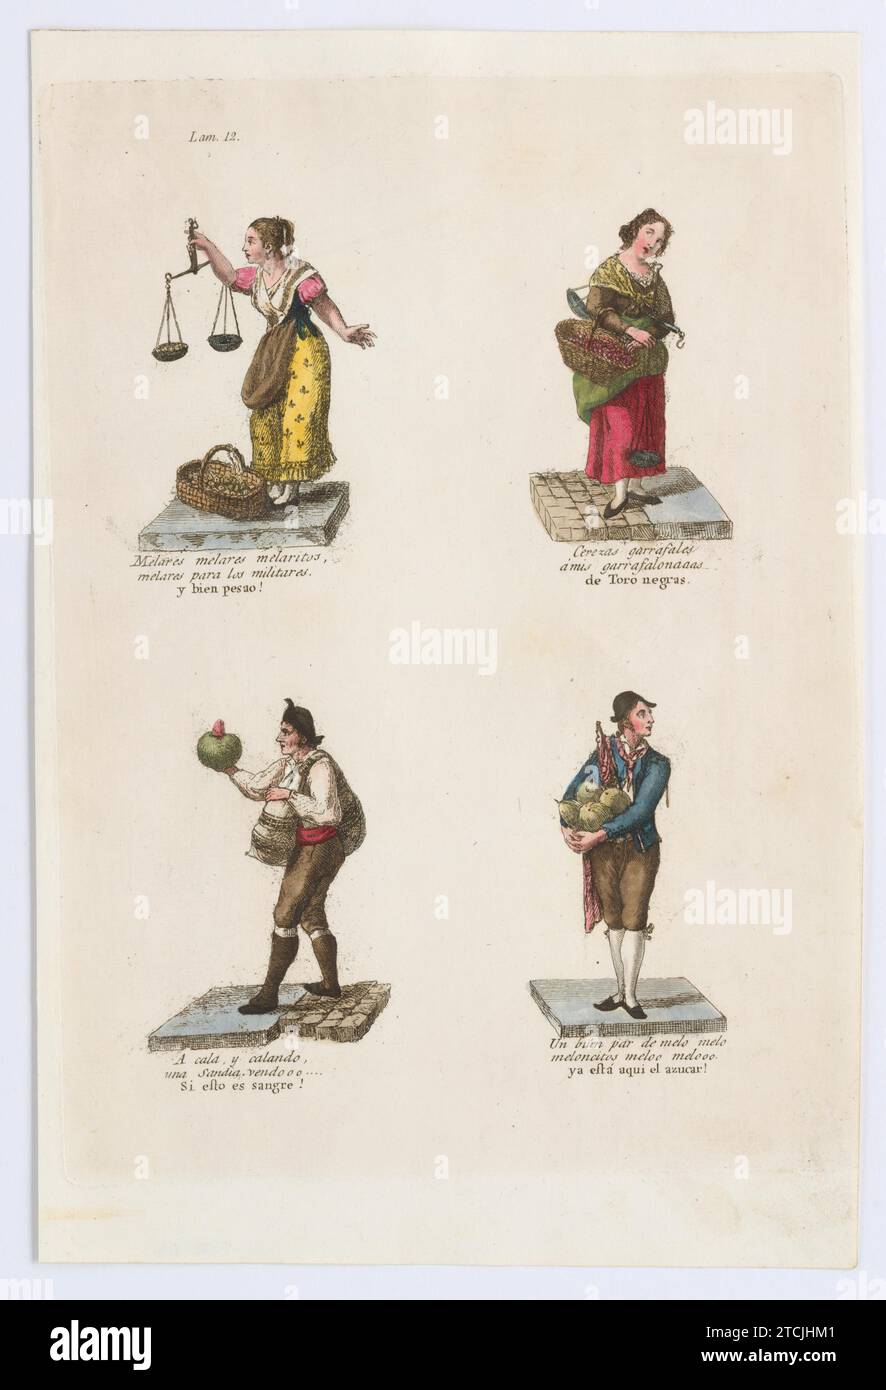 Plate 12: four street vendors from Madrid selling dried fruit, cherries, and melons, from 'Los Gritos de Madrid' (The Cries of Madrid) 2022 by Imprenta Real, Madrid Stock Photo